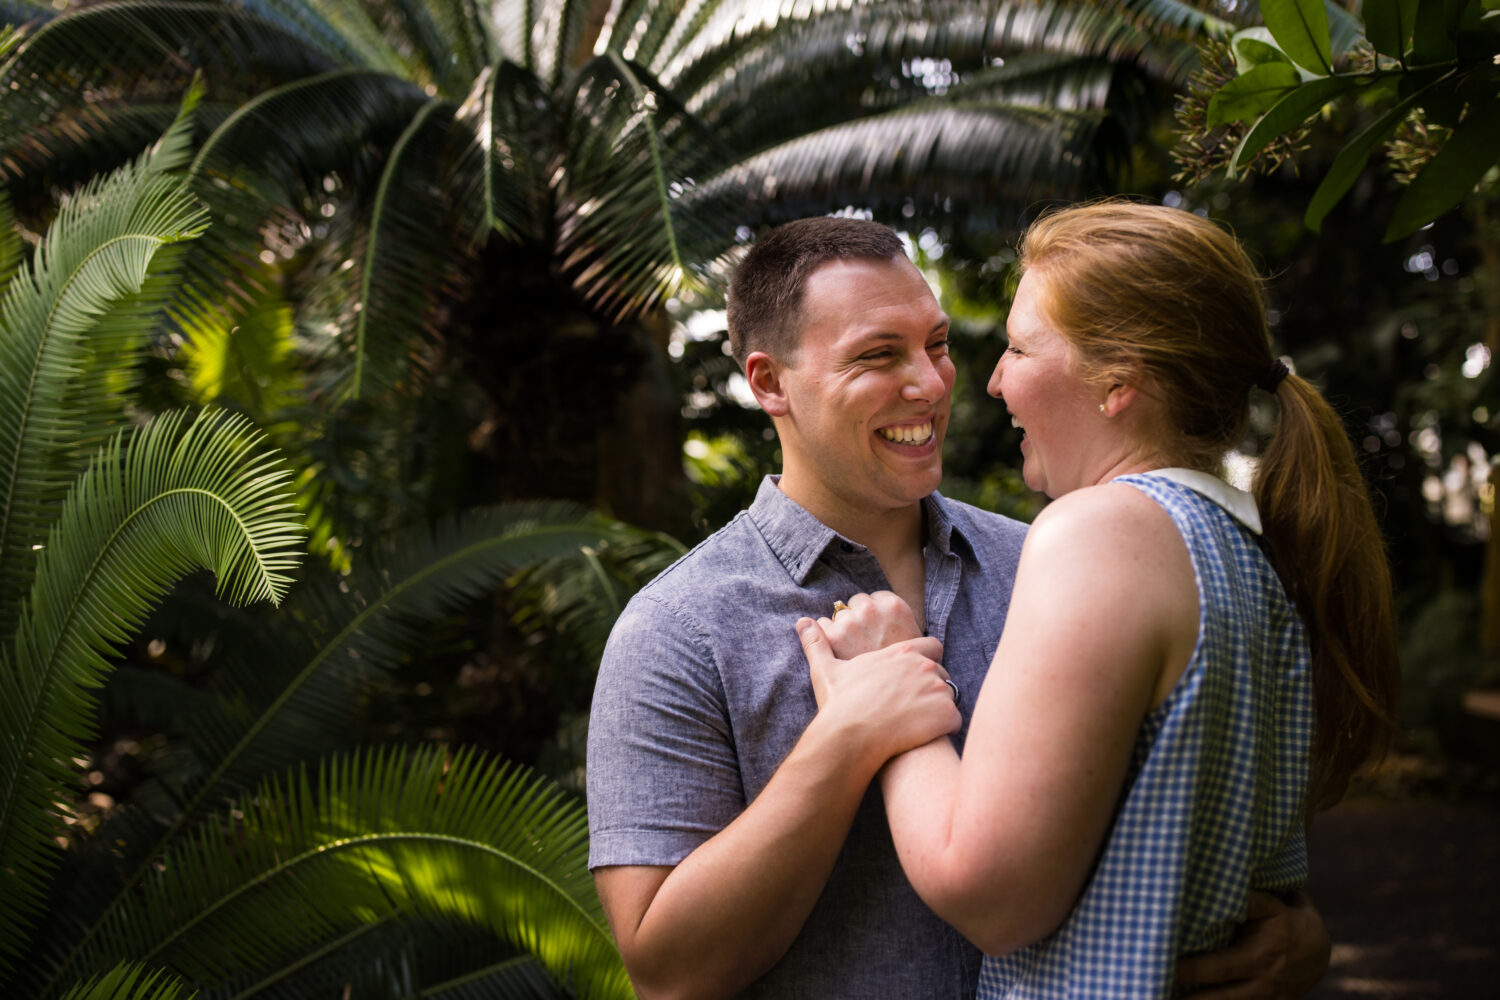 authentic proposal photographer, lisa rhinehart, captures this authentic image of the couple hugging and holding hands as they are laughing and smiling at one another inside of the garden 